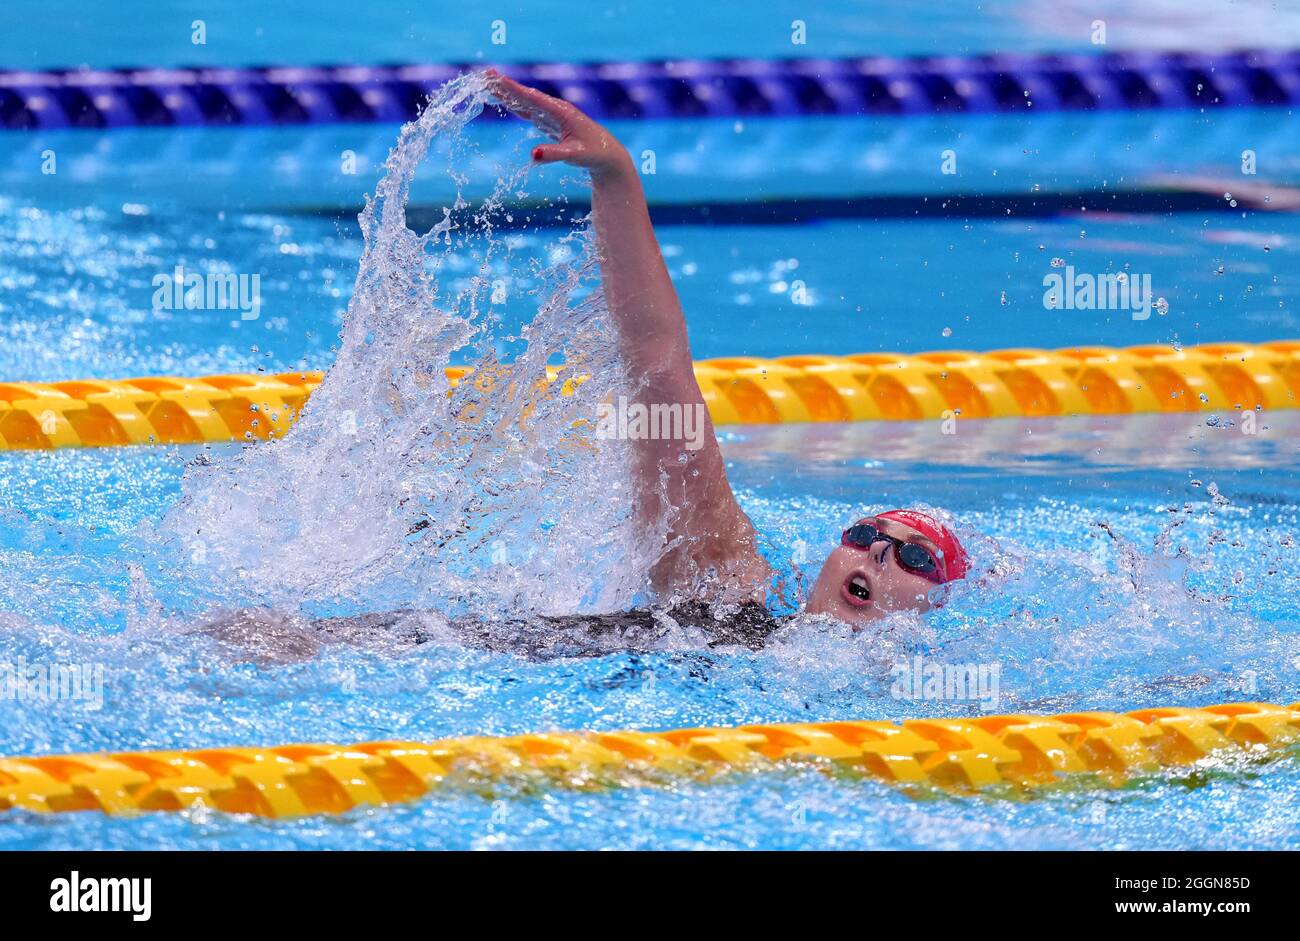 Great Britains Jessica Jane Applegate On The Way To Bronze In The Womens 100m Backstroke S14